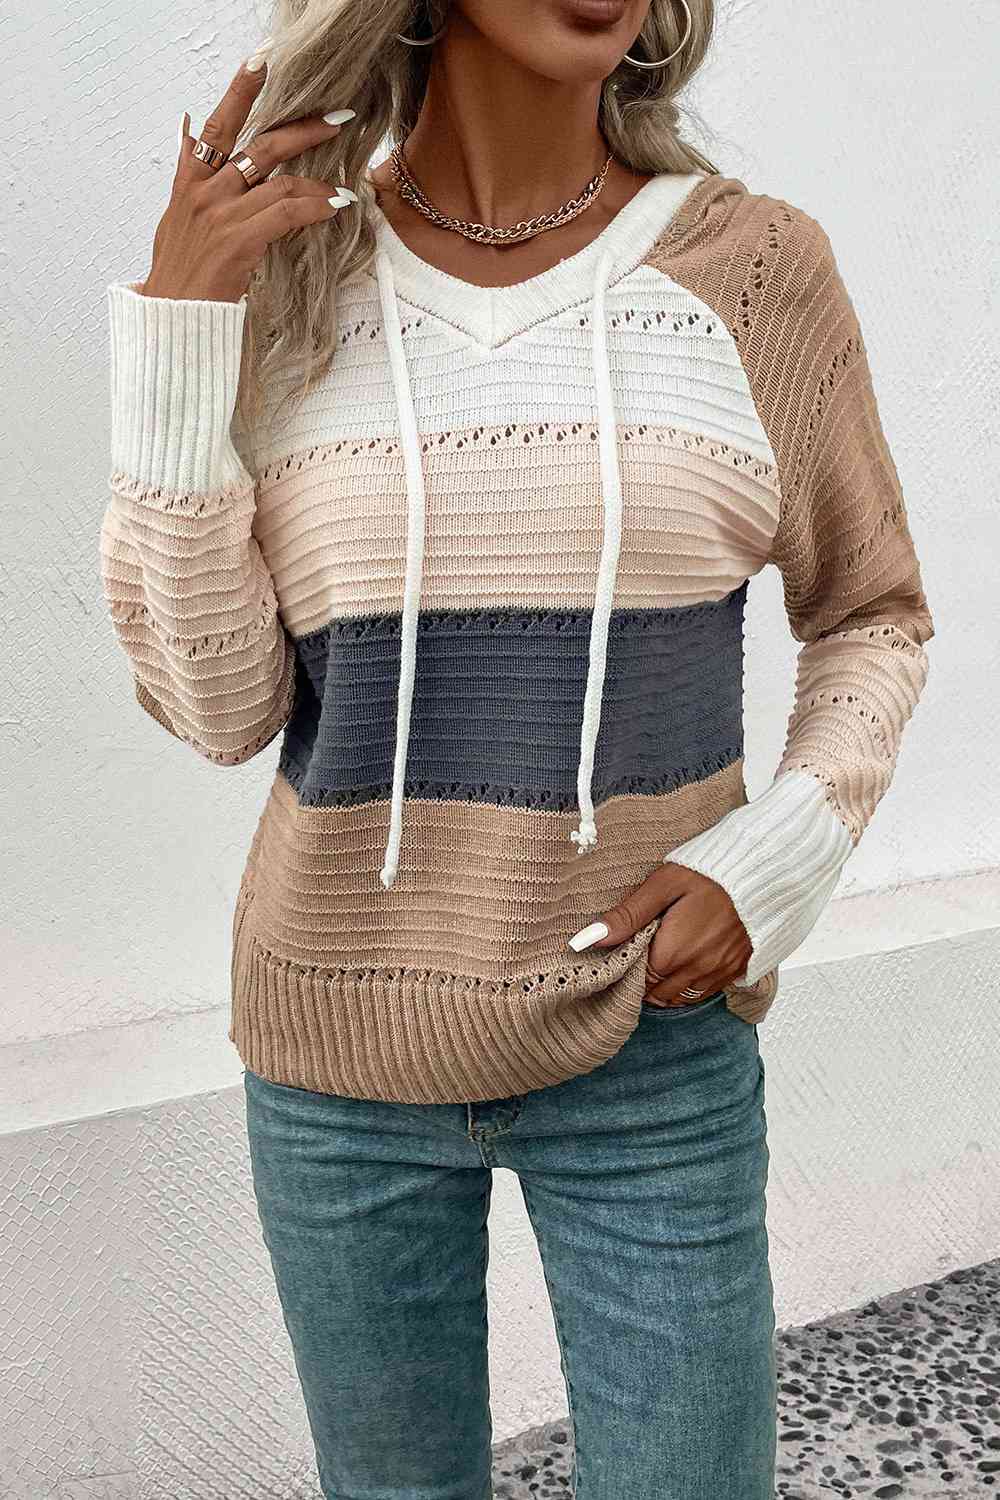 Swiss Coffee Hooded Sweater - Cheeky Chic Boutique